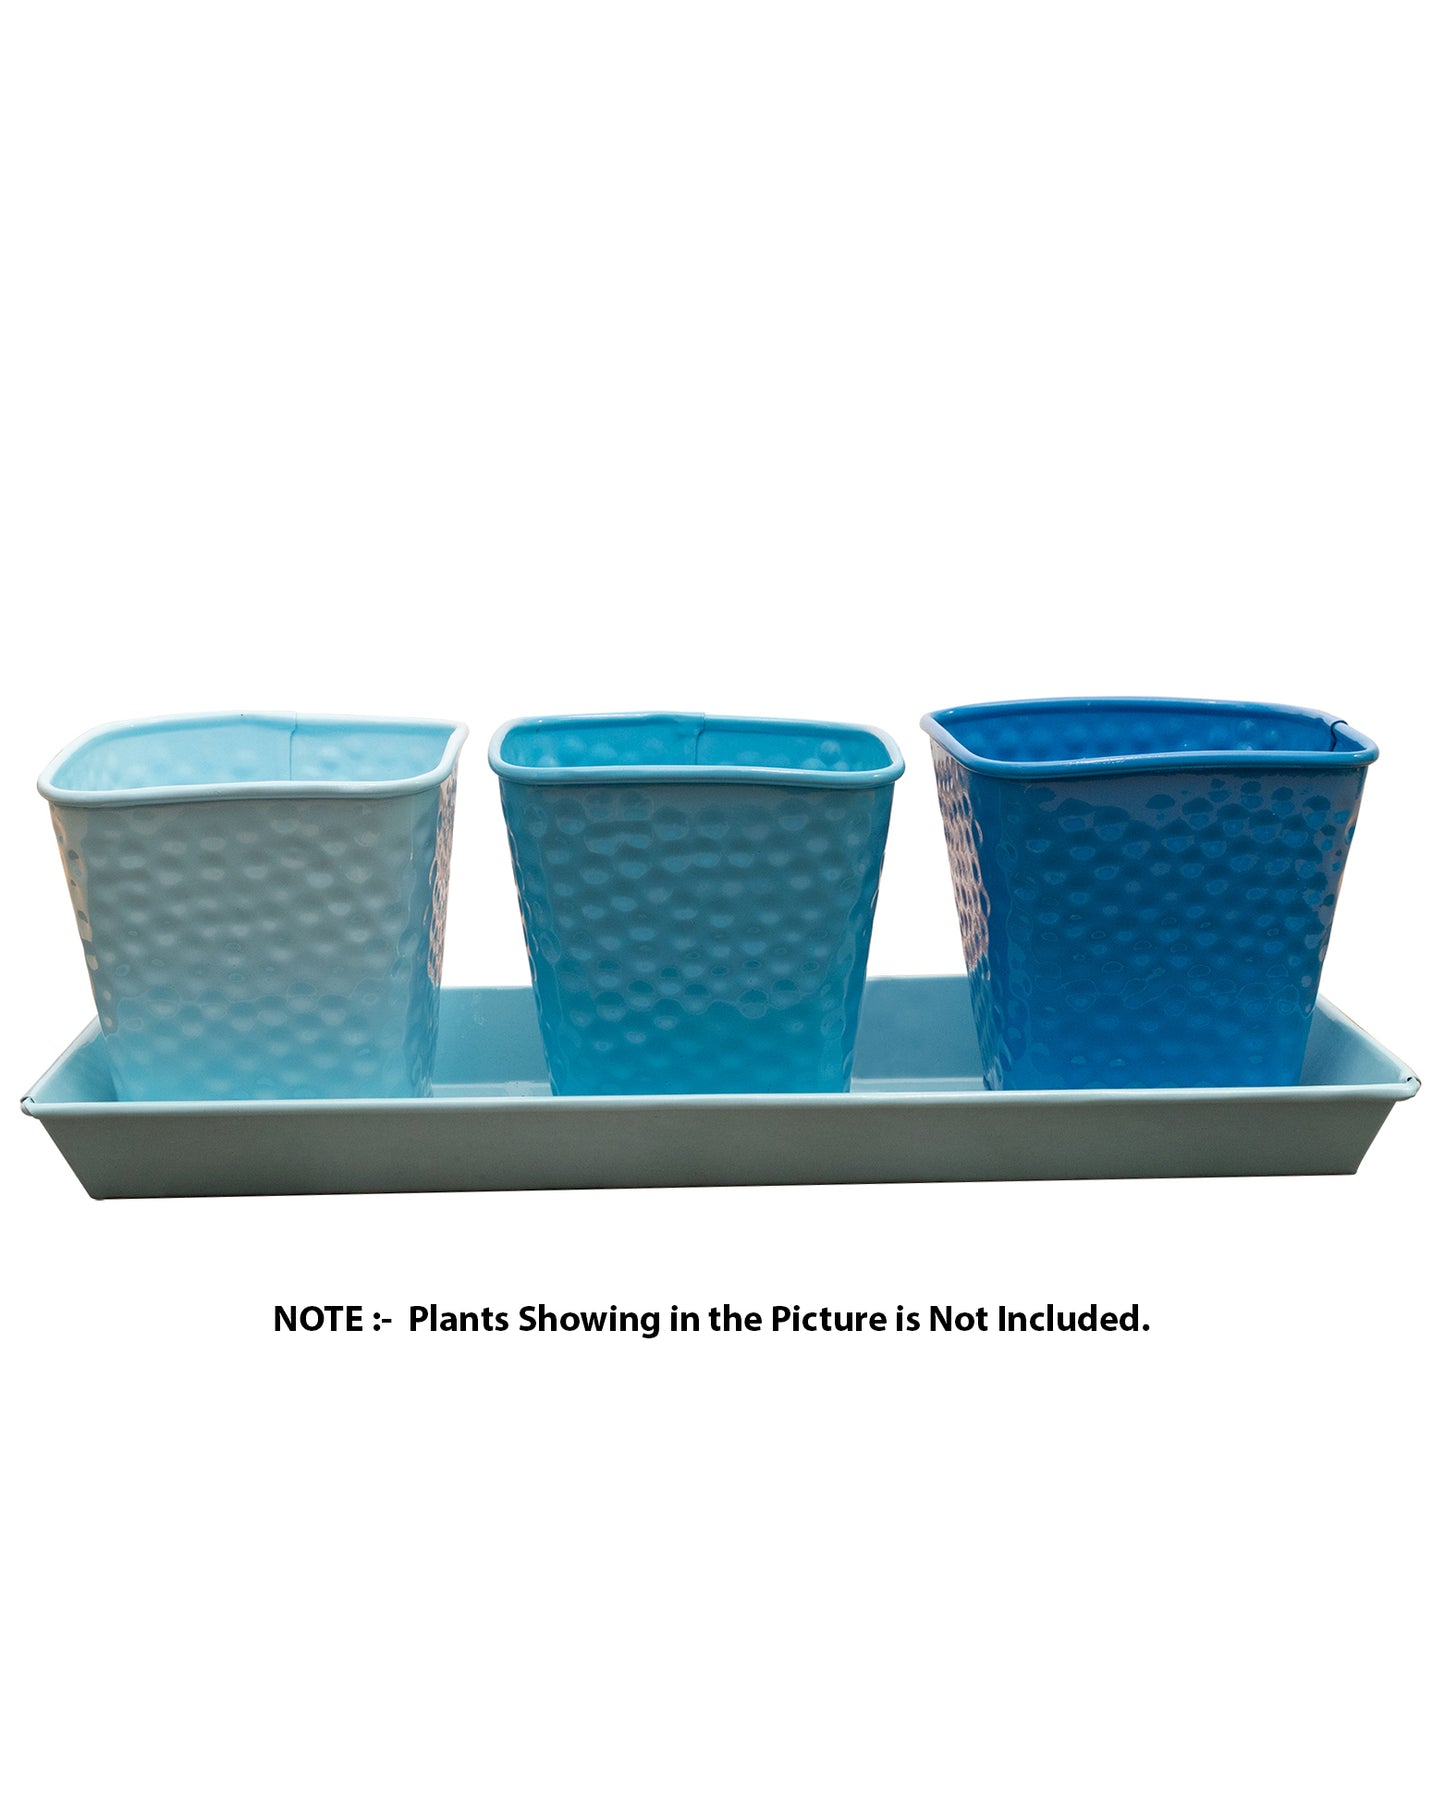 Herb Pot Planter Set with Tray for Indoor Garden or Outdoor Use,Metal Succulent Potted Planters for Kitchen, (Set of 3, 4.25” x 4” Planters on 12.5” x 4" Tray)